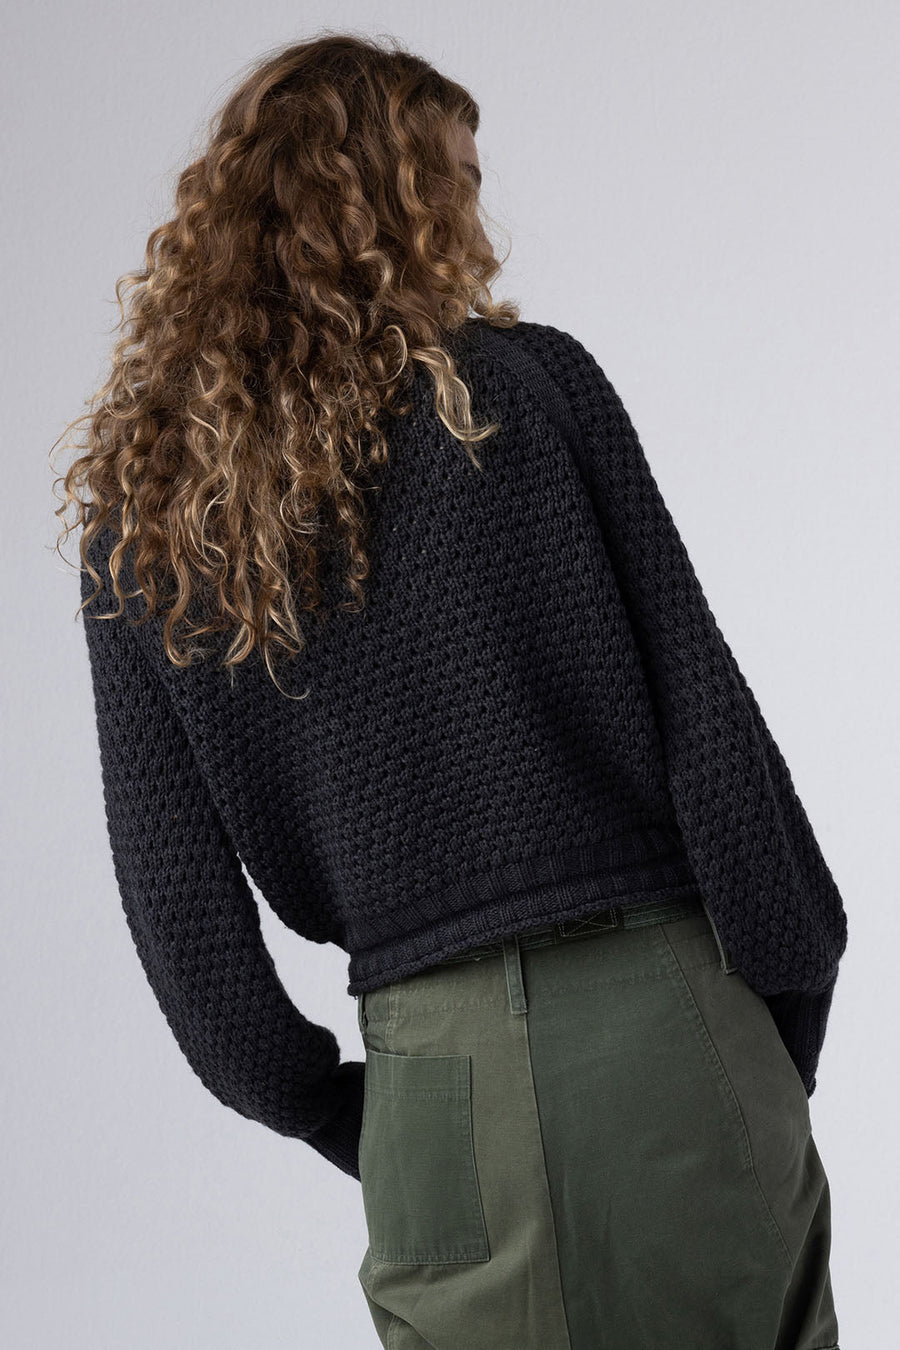 HONEYCOMB CROPPED TURTLENECK SWEATER, CHARCOAL - Burning Torch Online Boutique